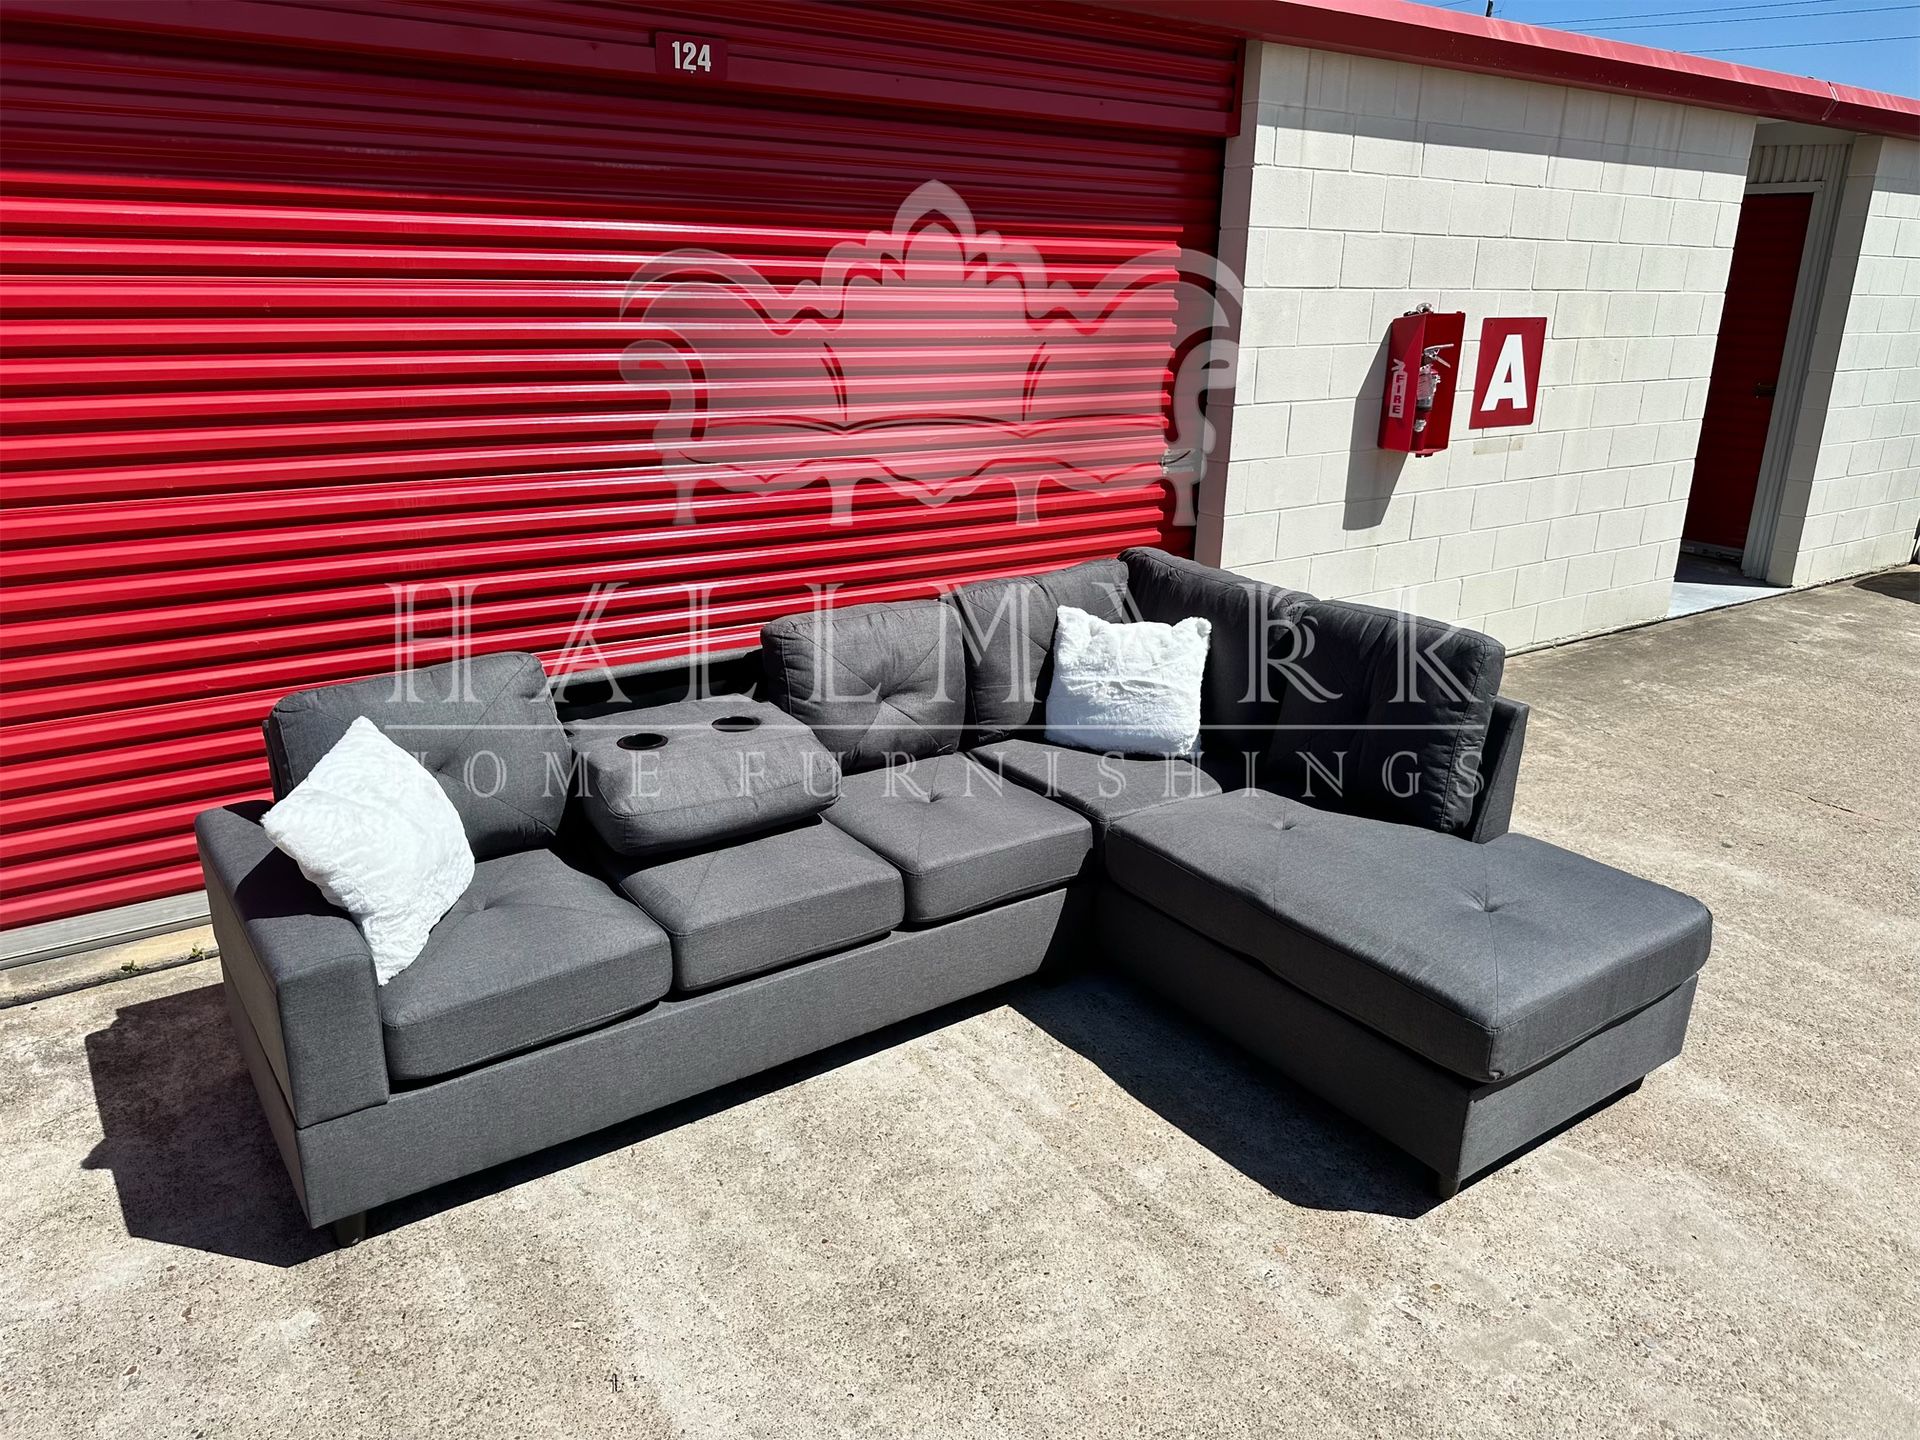 New Grey Sectional Couches (🚚FREE DELIVER